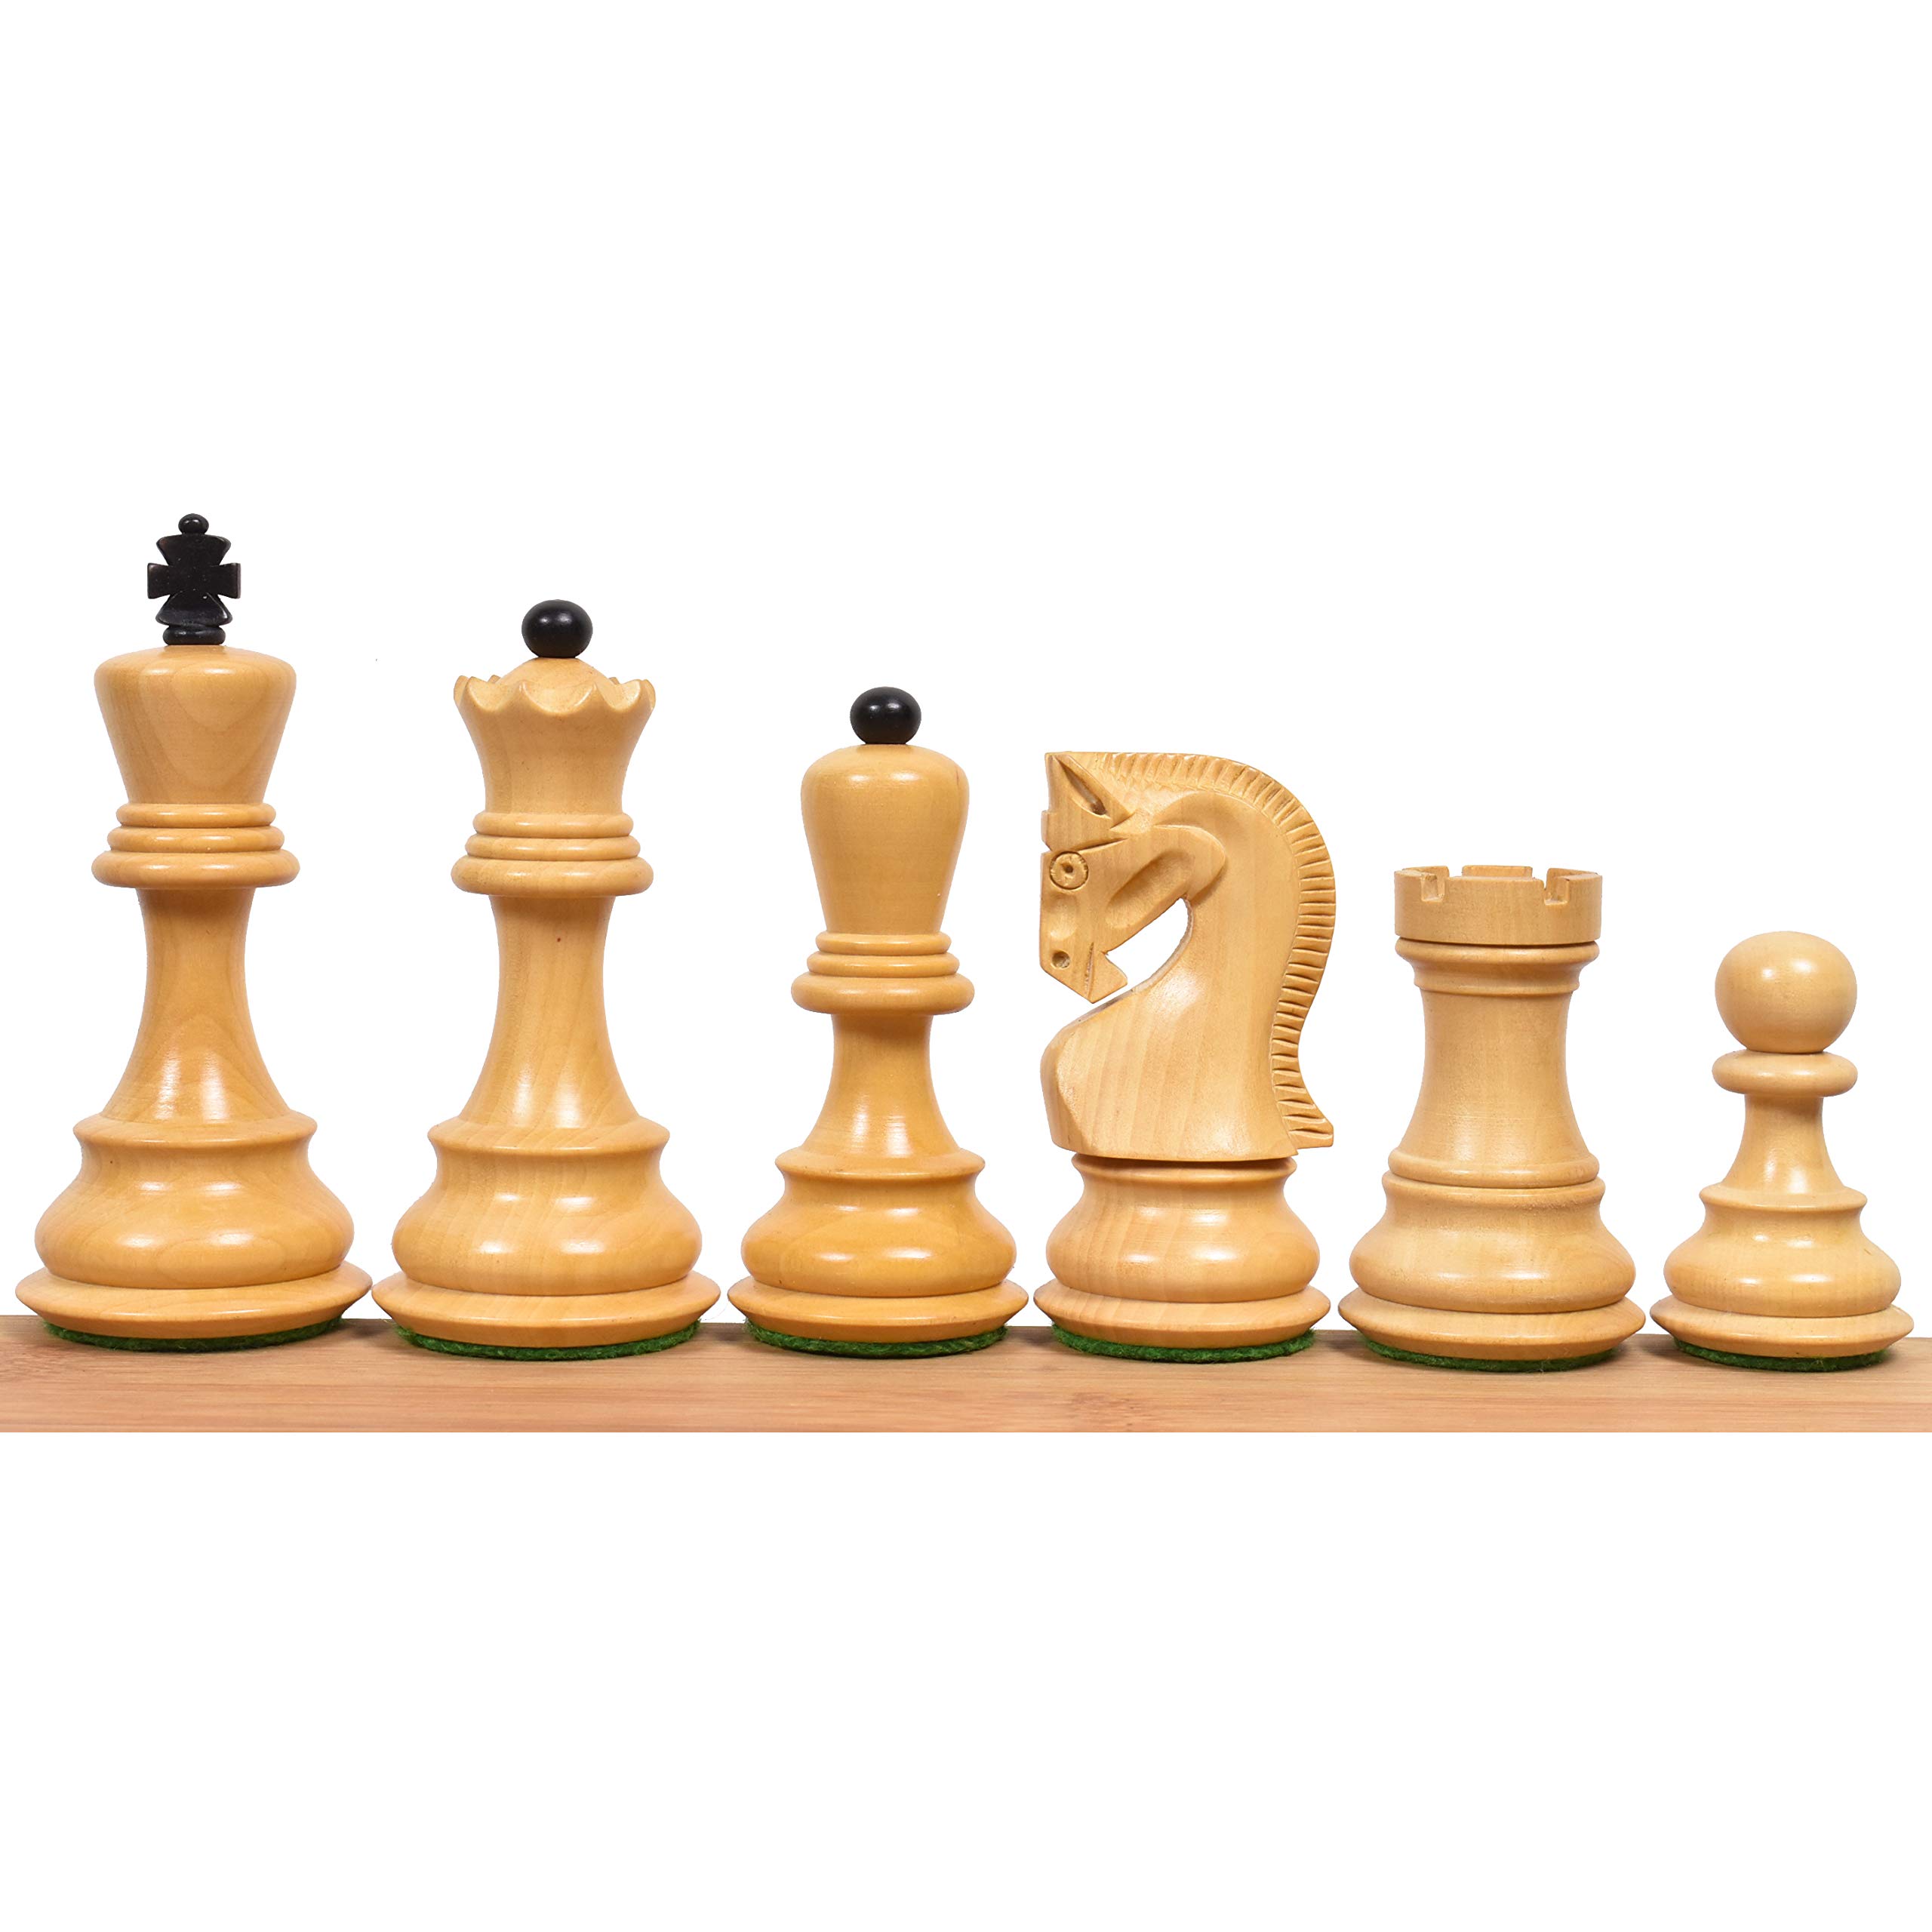 Royal Chess Mall Russian Zagreb Chess Pieces Only Chess Set, Ebonized Boxwood Wooden Chess Set, 3.9-in King, Weighted Chess Pieces for Chess Game (2.3 lbs)